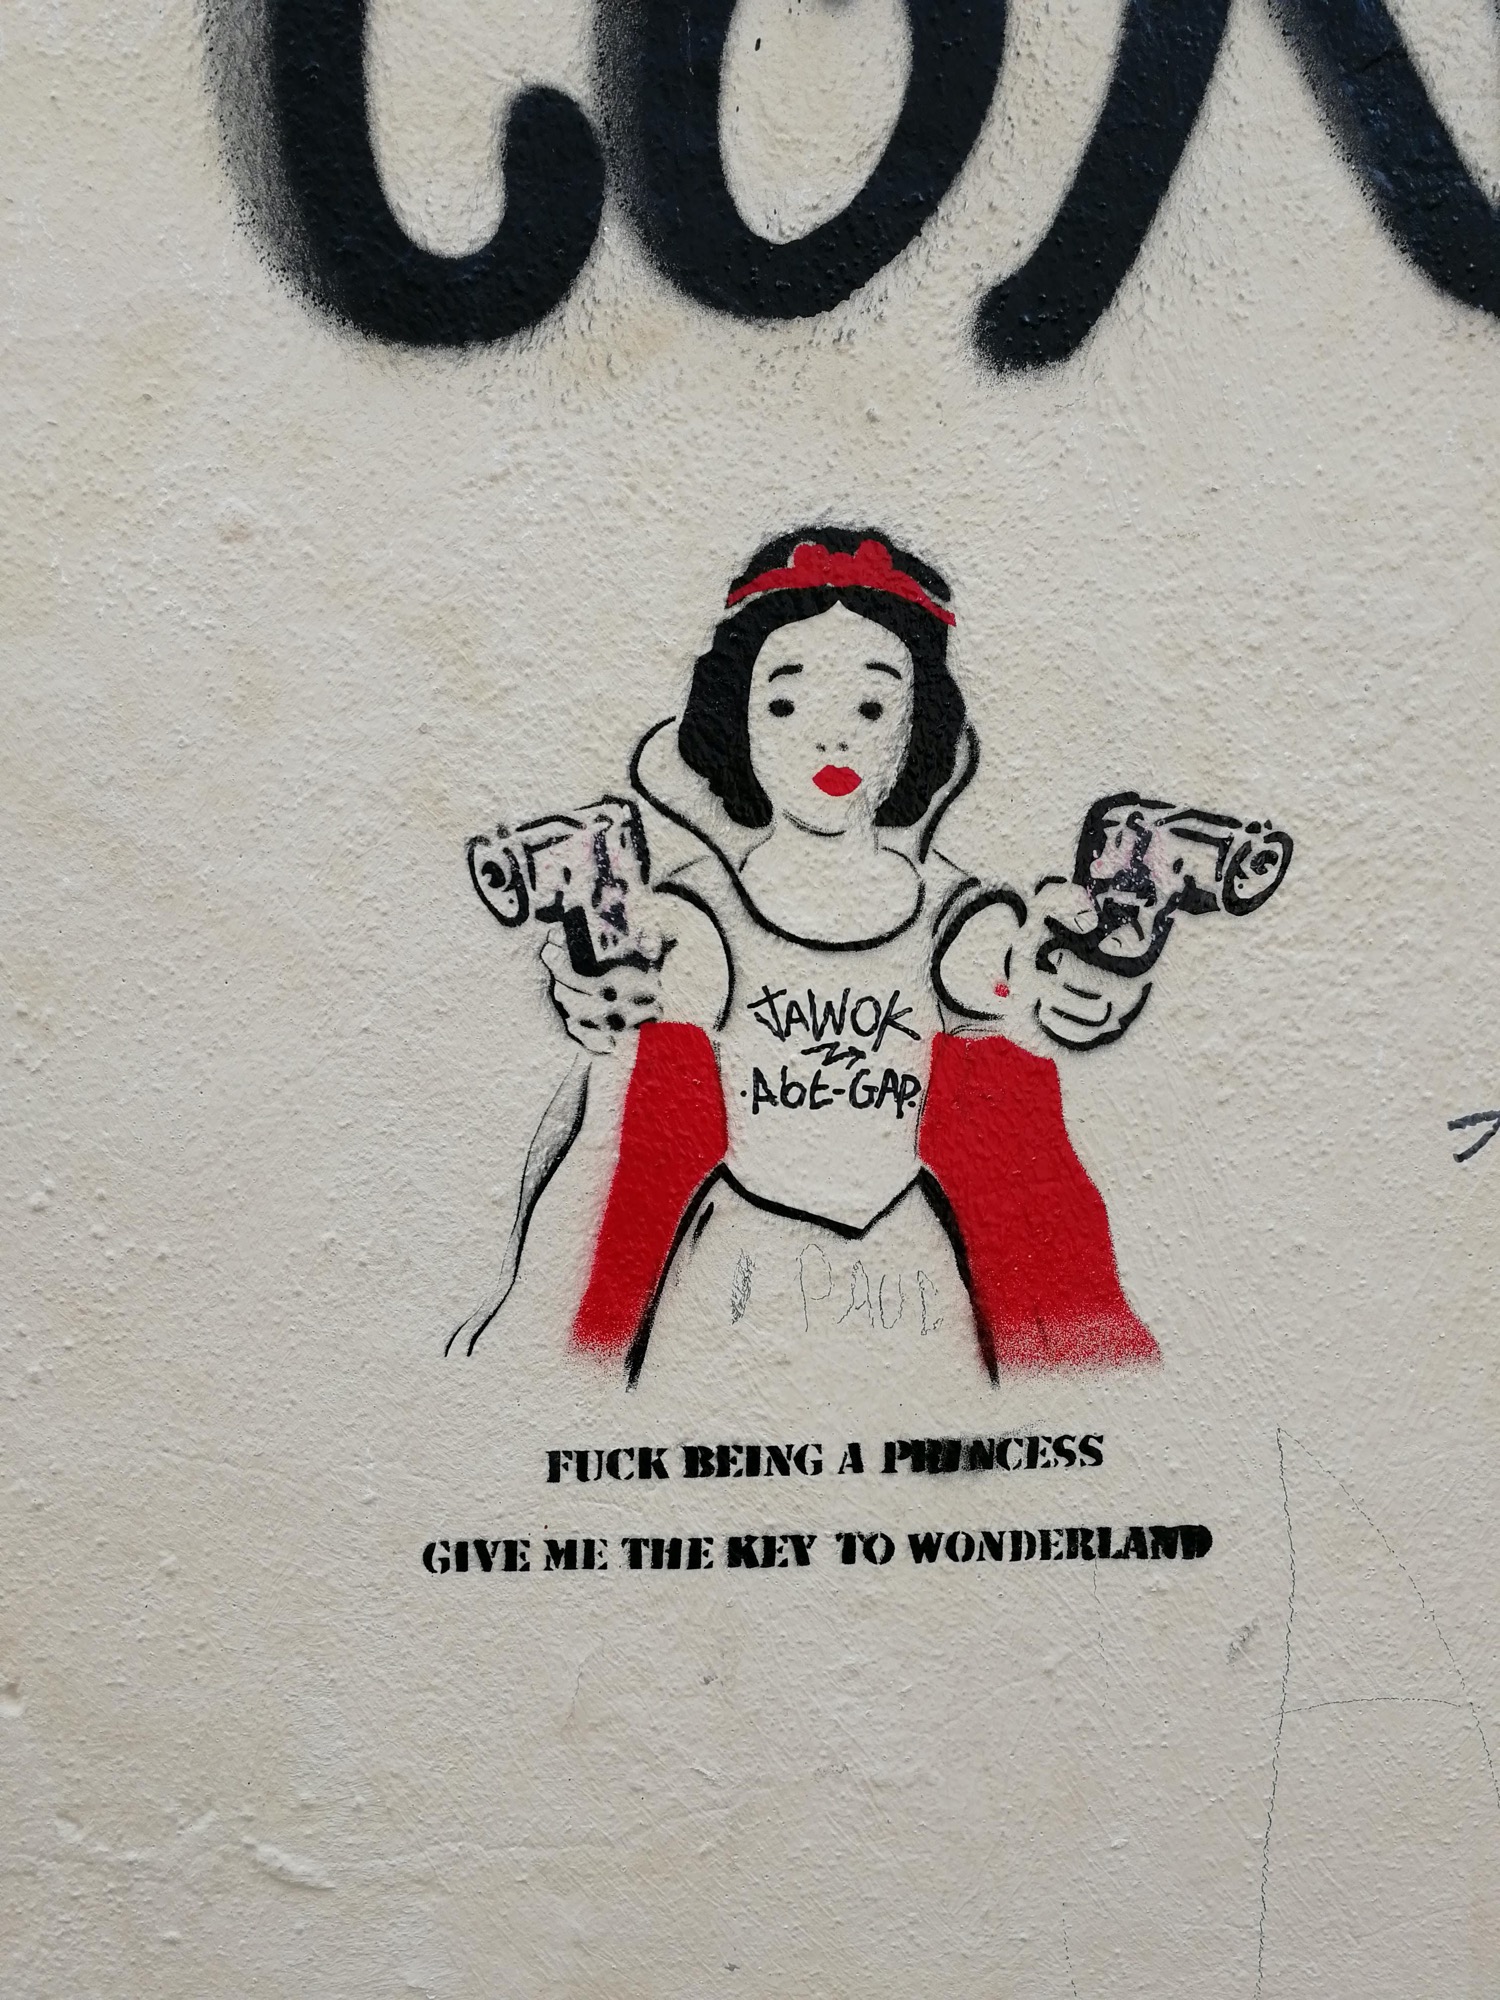 Graffiti 1553 Fuck being a princess, give me the key to wonderland captured by Rabot in Lyon France